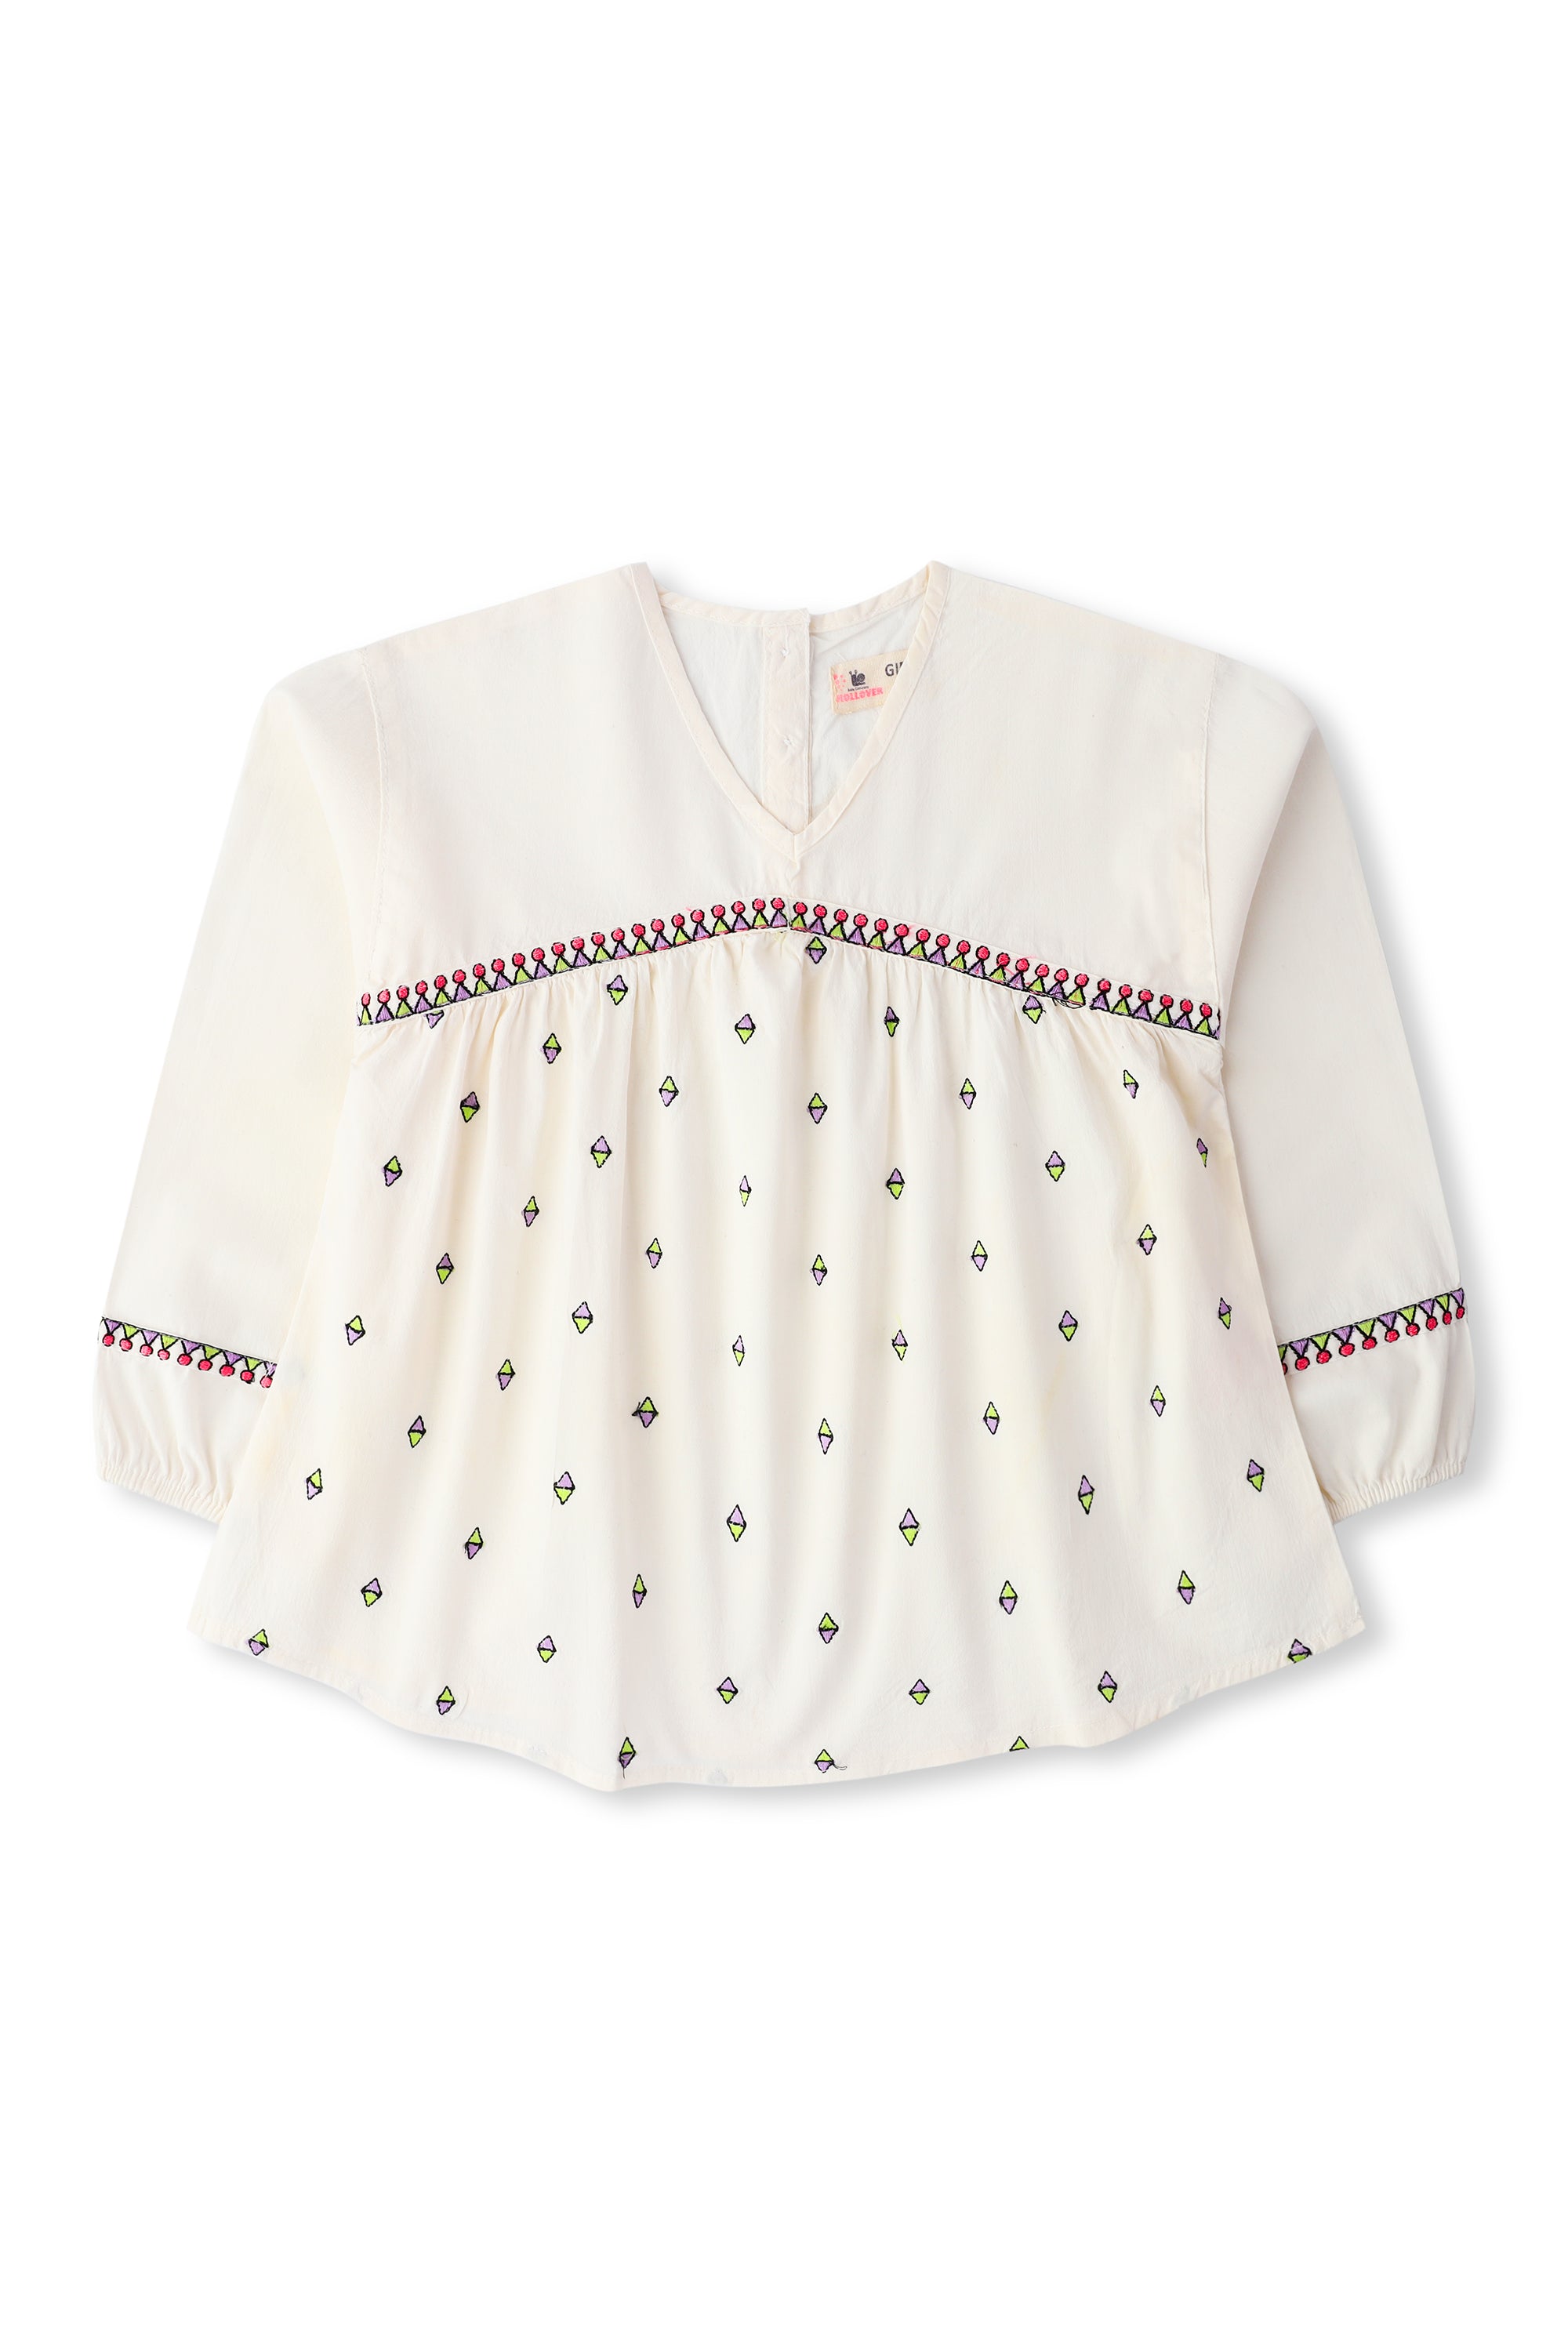 Girls White Embroidered Top